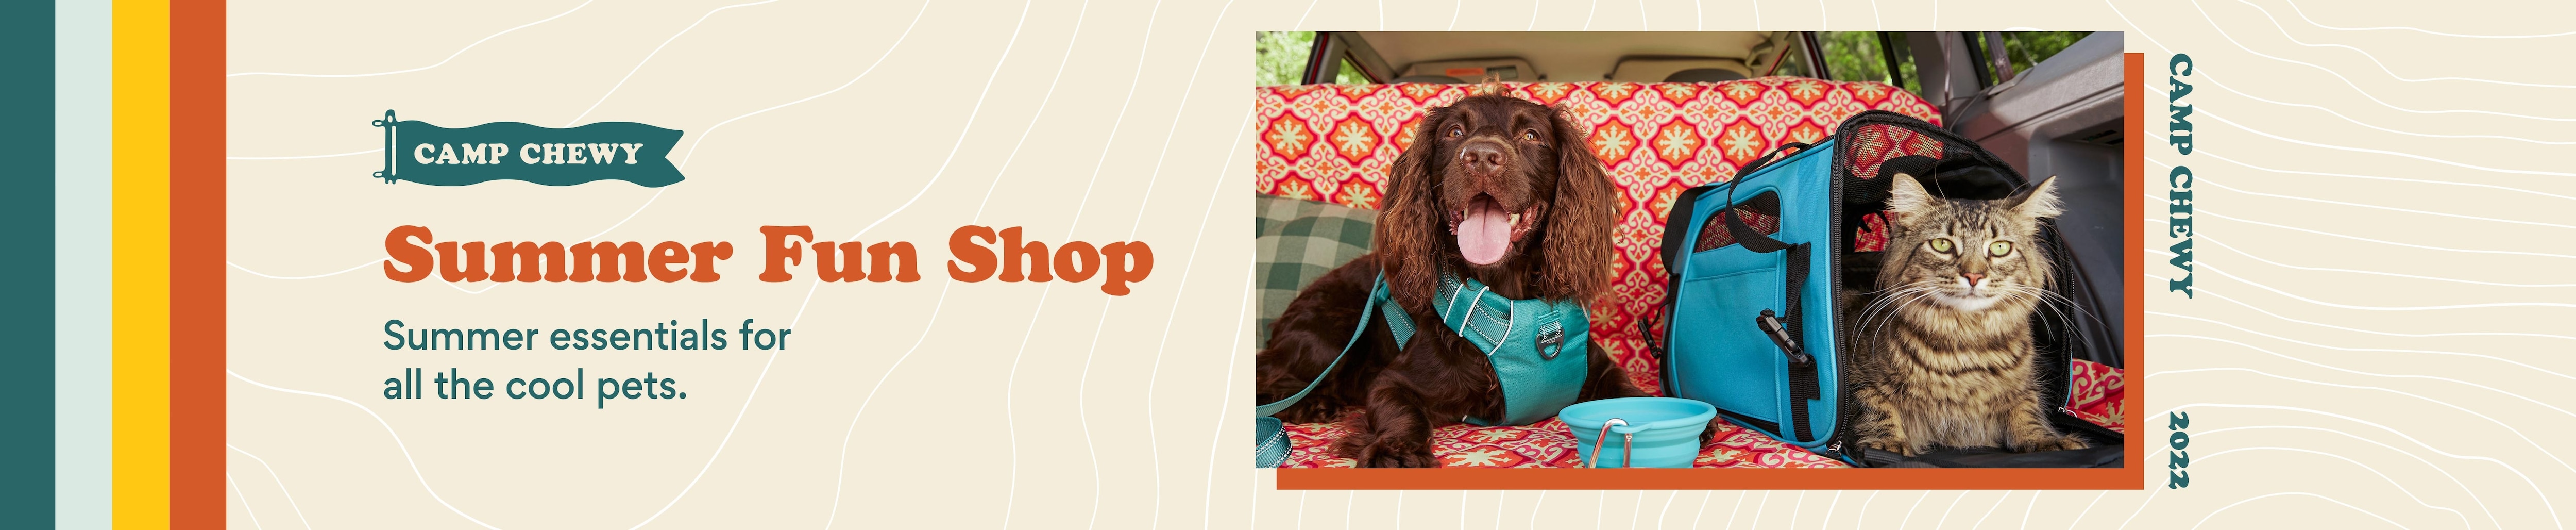 Camp Chewy. Summer Fun Shop. Summer essentials for all the cool pets.